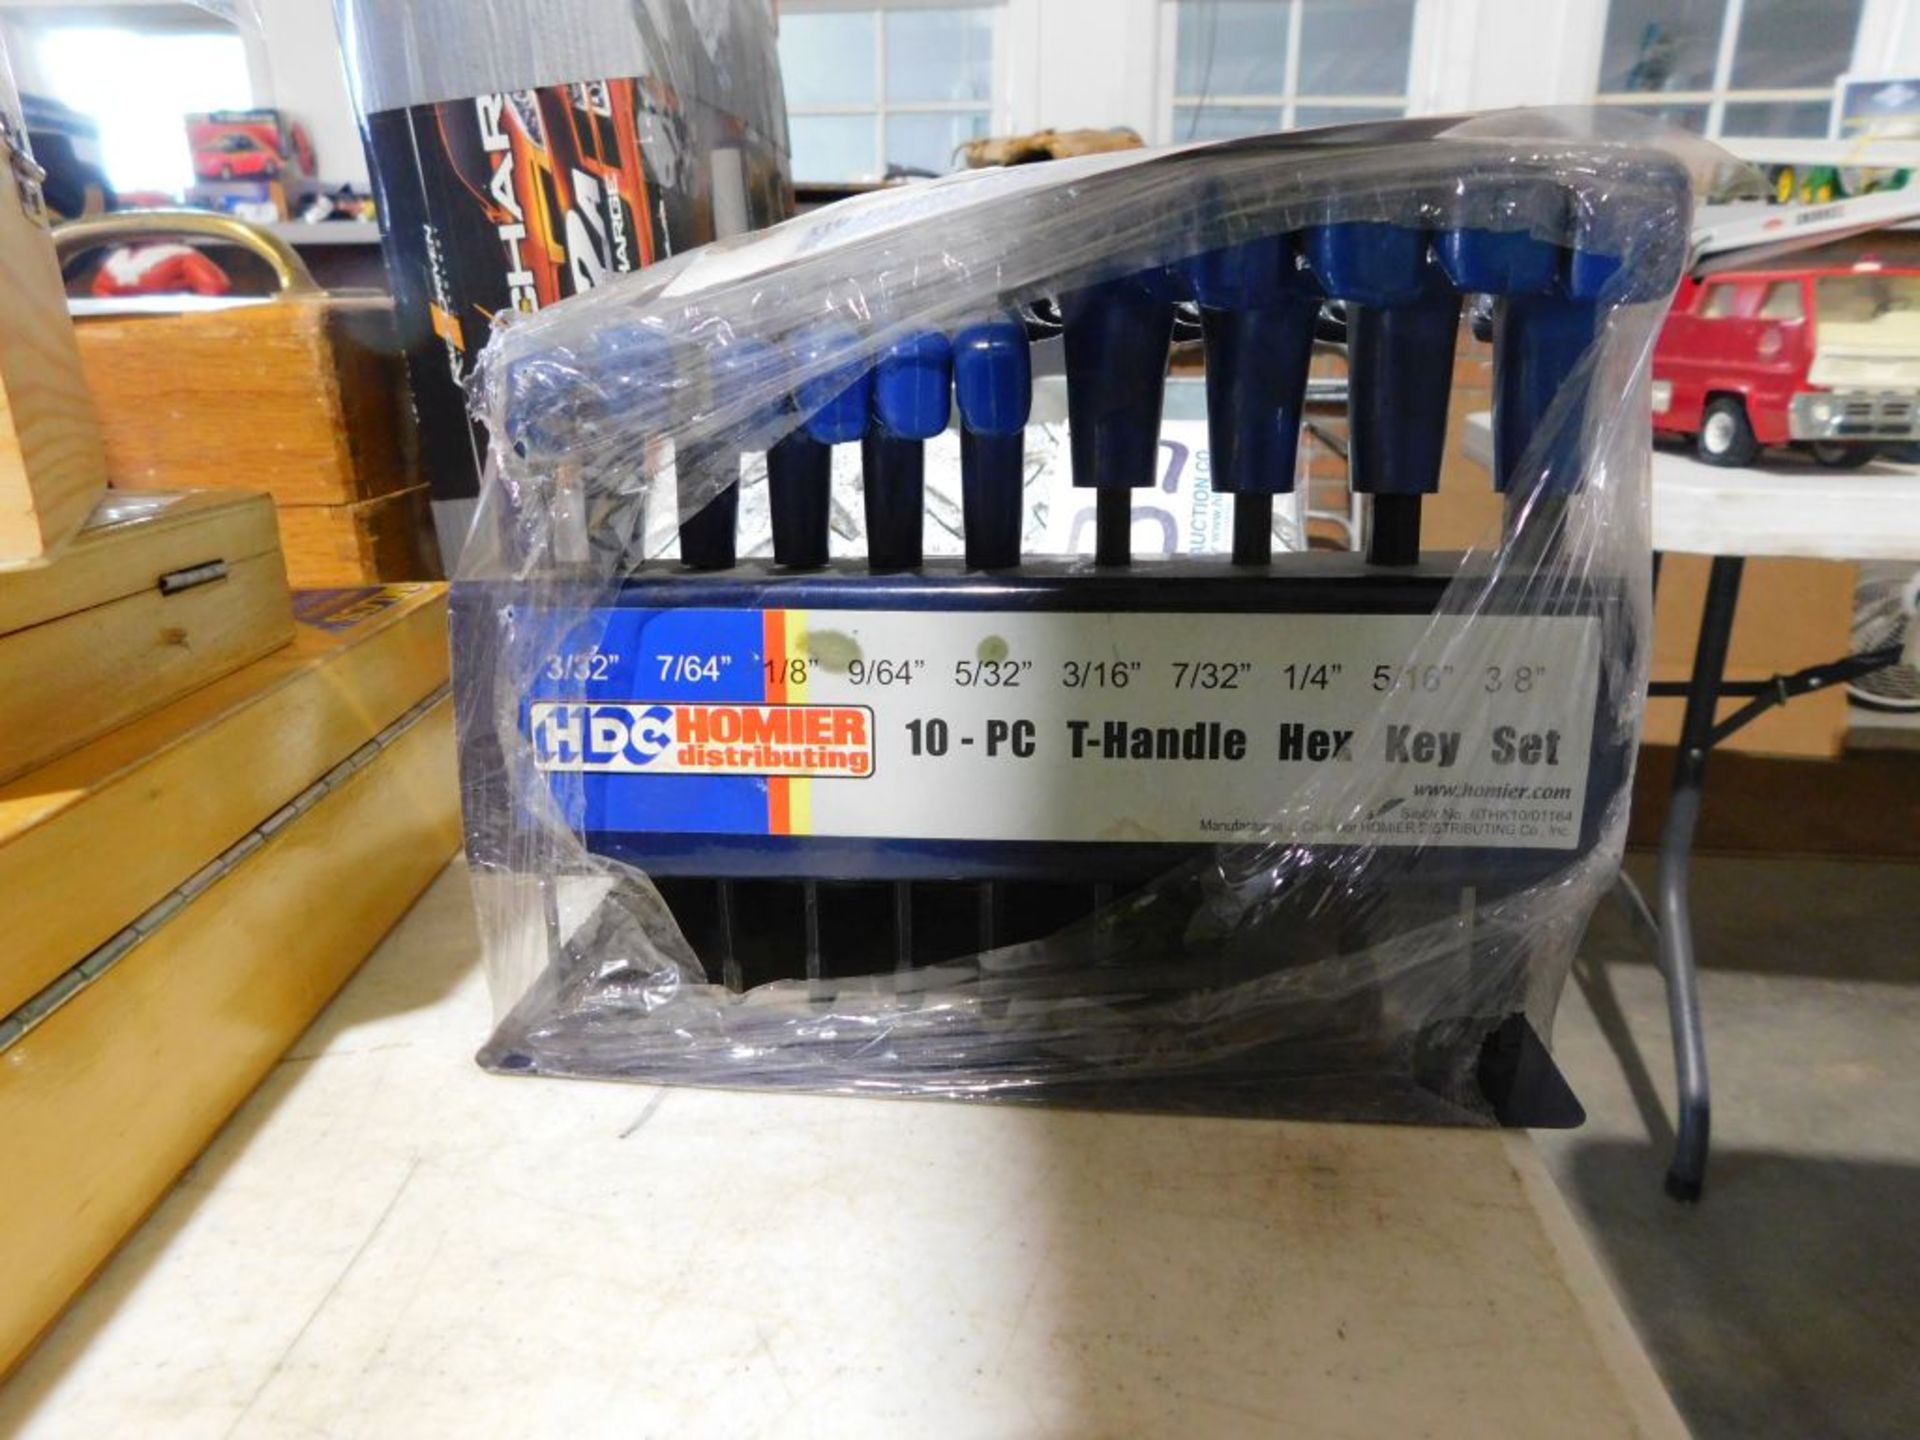 T-handle hex key set, (10 pcs.). (Located at and to be picked up at: 2862 Wagner Rd., Waterloo, IA)